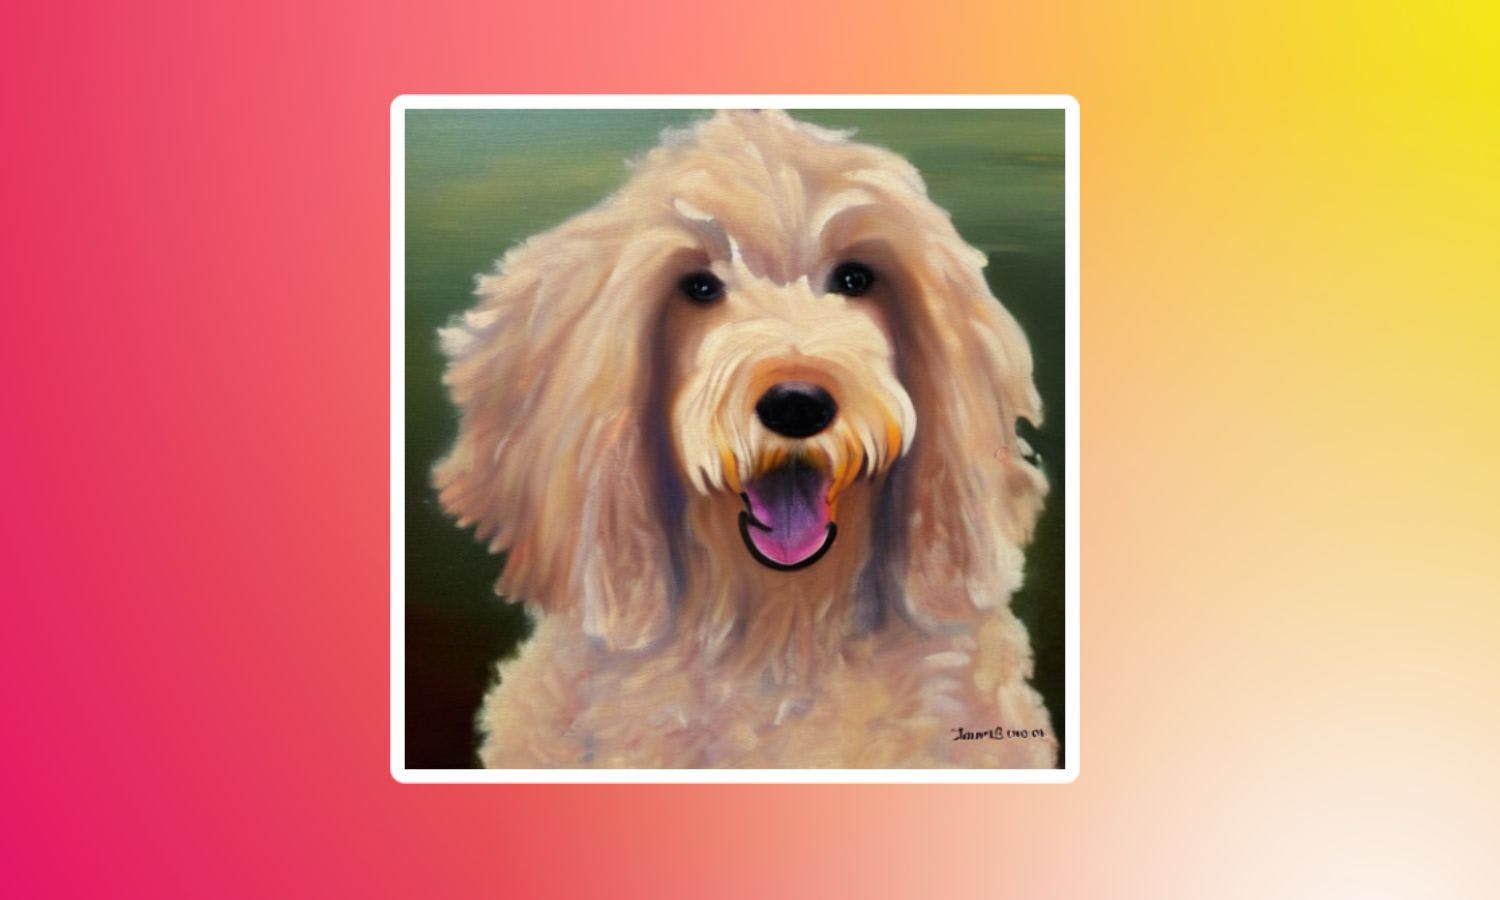 An oil painting of a goldendoodle